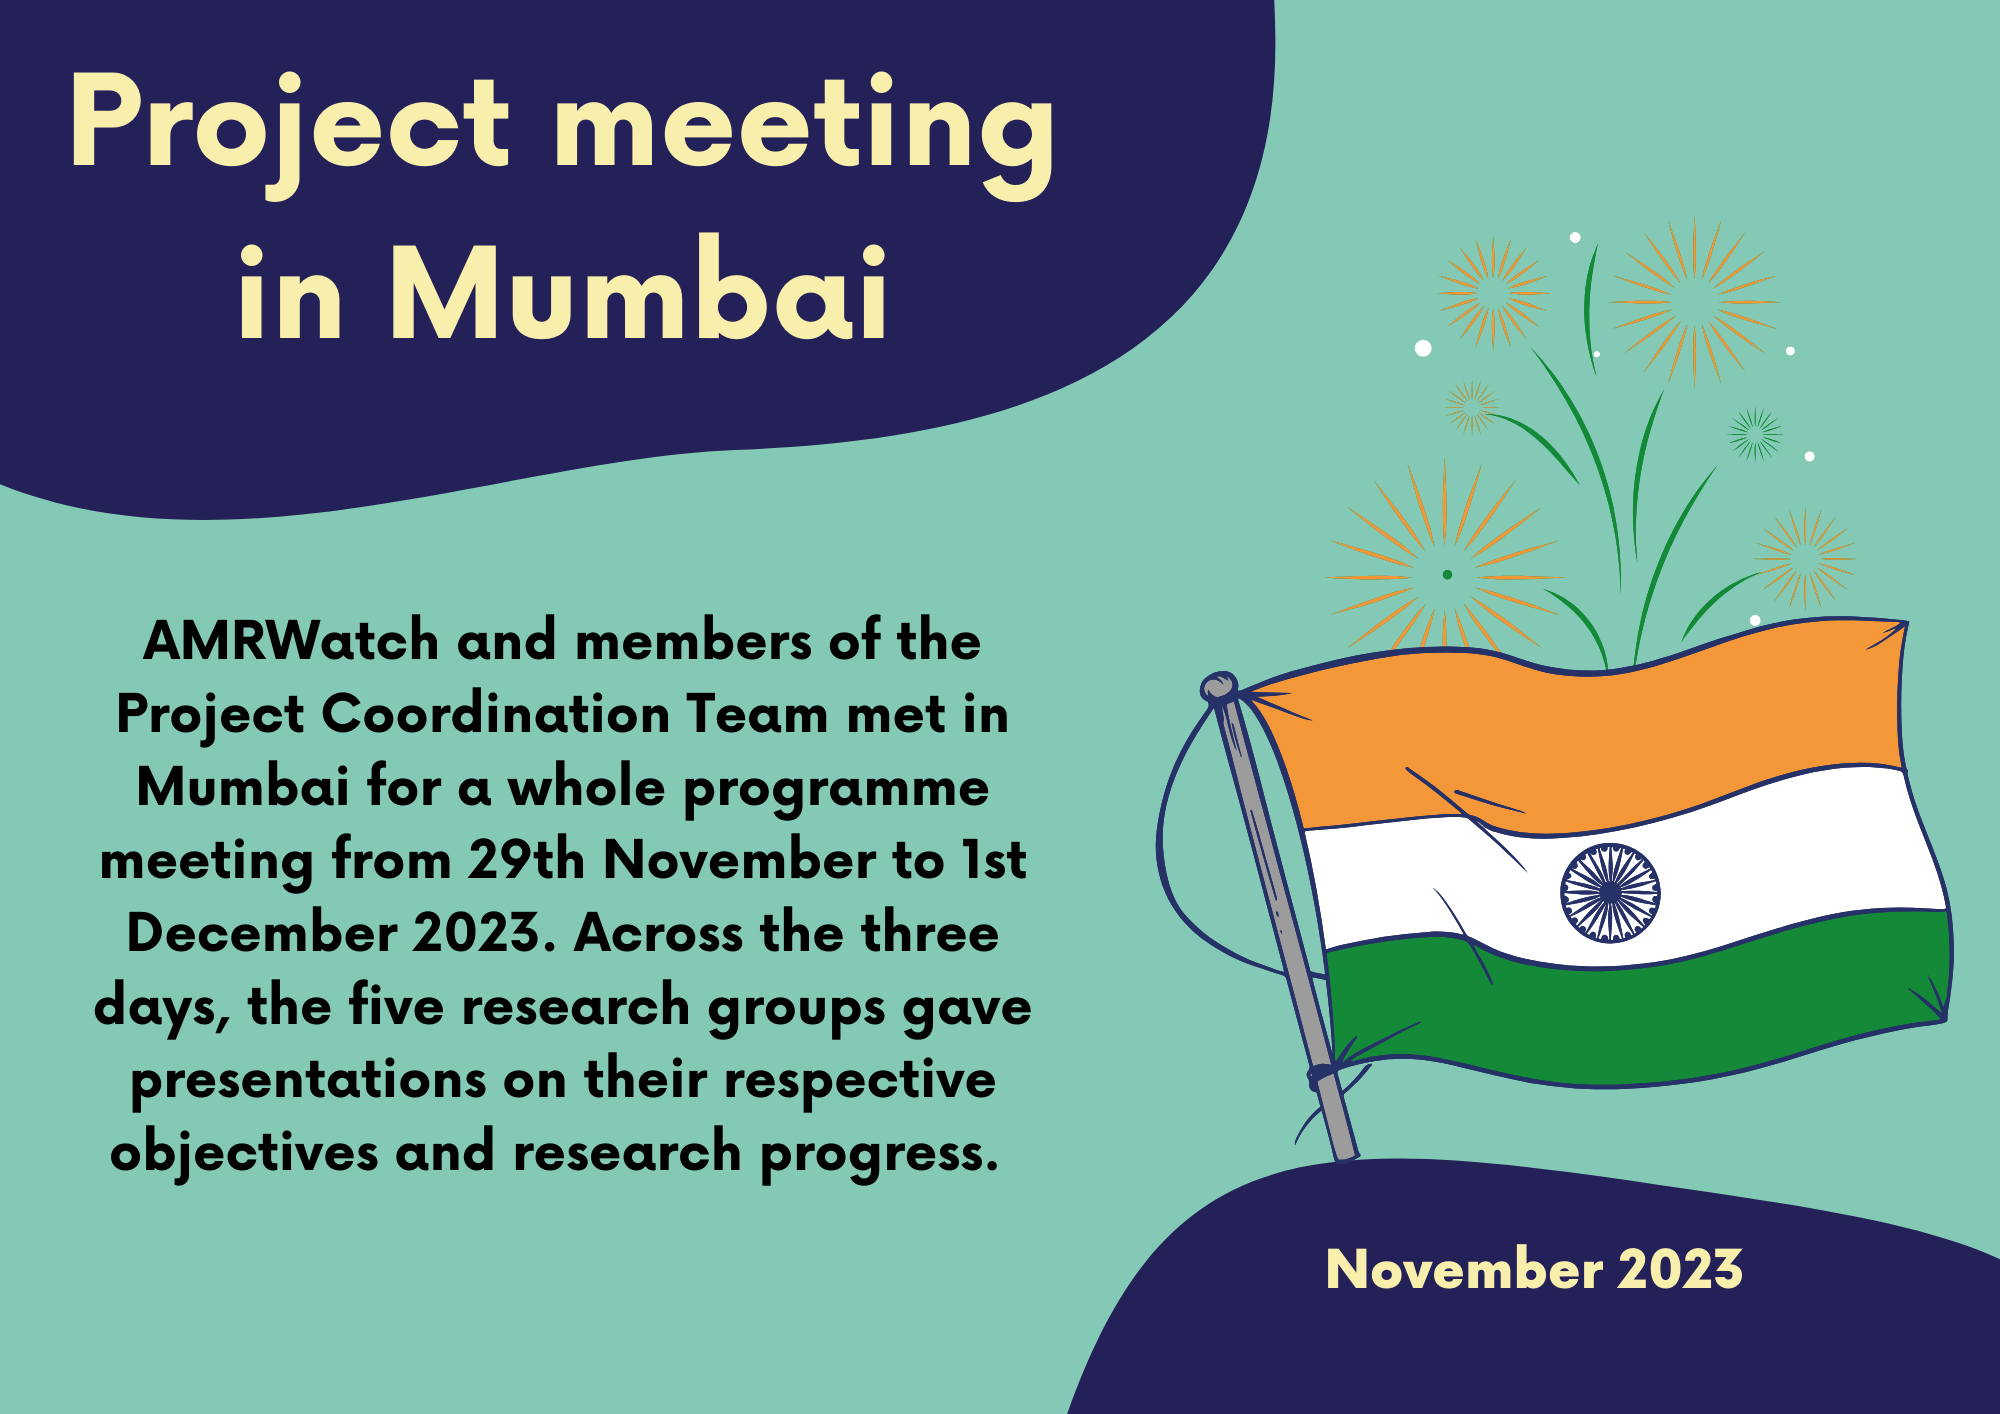 A colourful news graphic titled 'Project Meeting in Mumbai'. The text reads: 'AMRWatch and members of the Project Coordination Team met in Mumbai for a whole programme meeting from 29th November to 1st December 2023. Across the three days, the five research groups gave presentations on their respective objectives and research progress.'